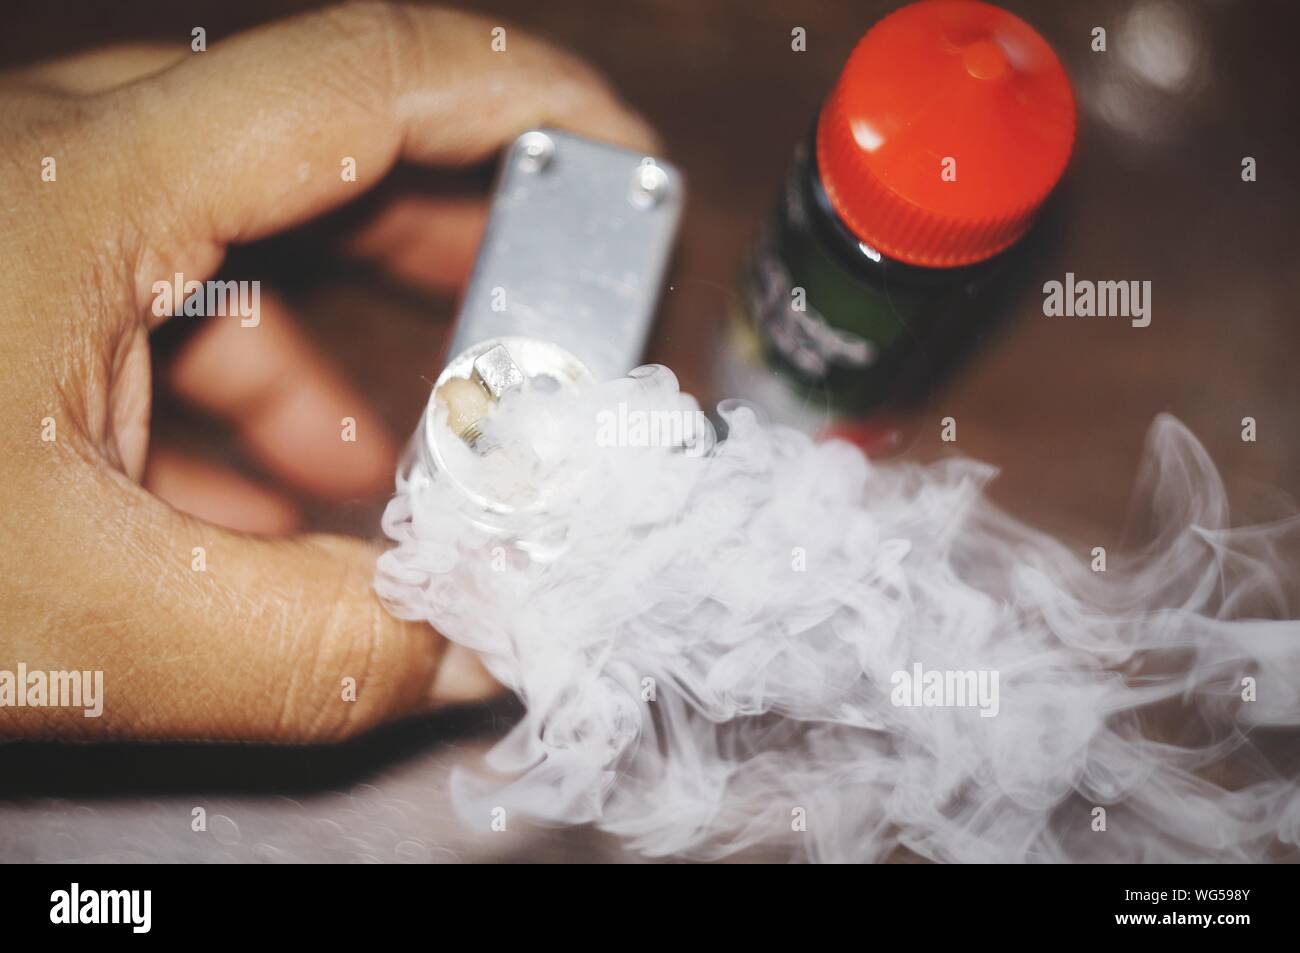 Close-up Of Hand Holding Narcotic Drug With Smoke Emitting From Bottle Stock Photo